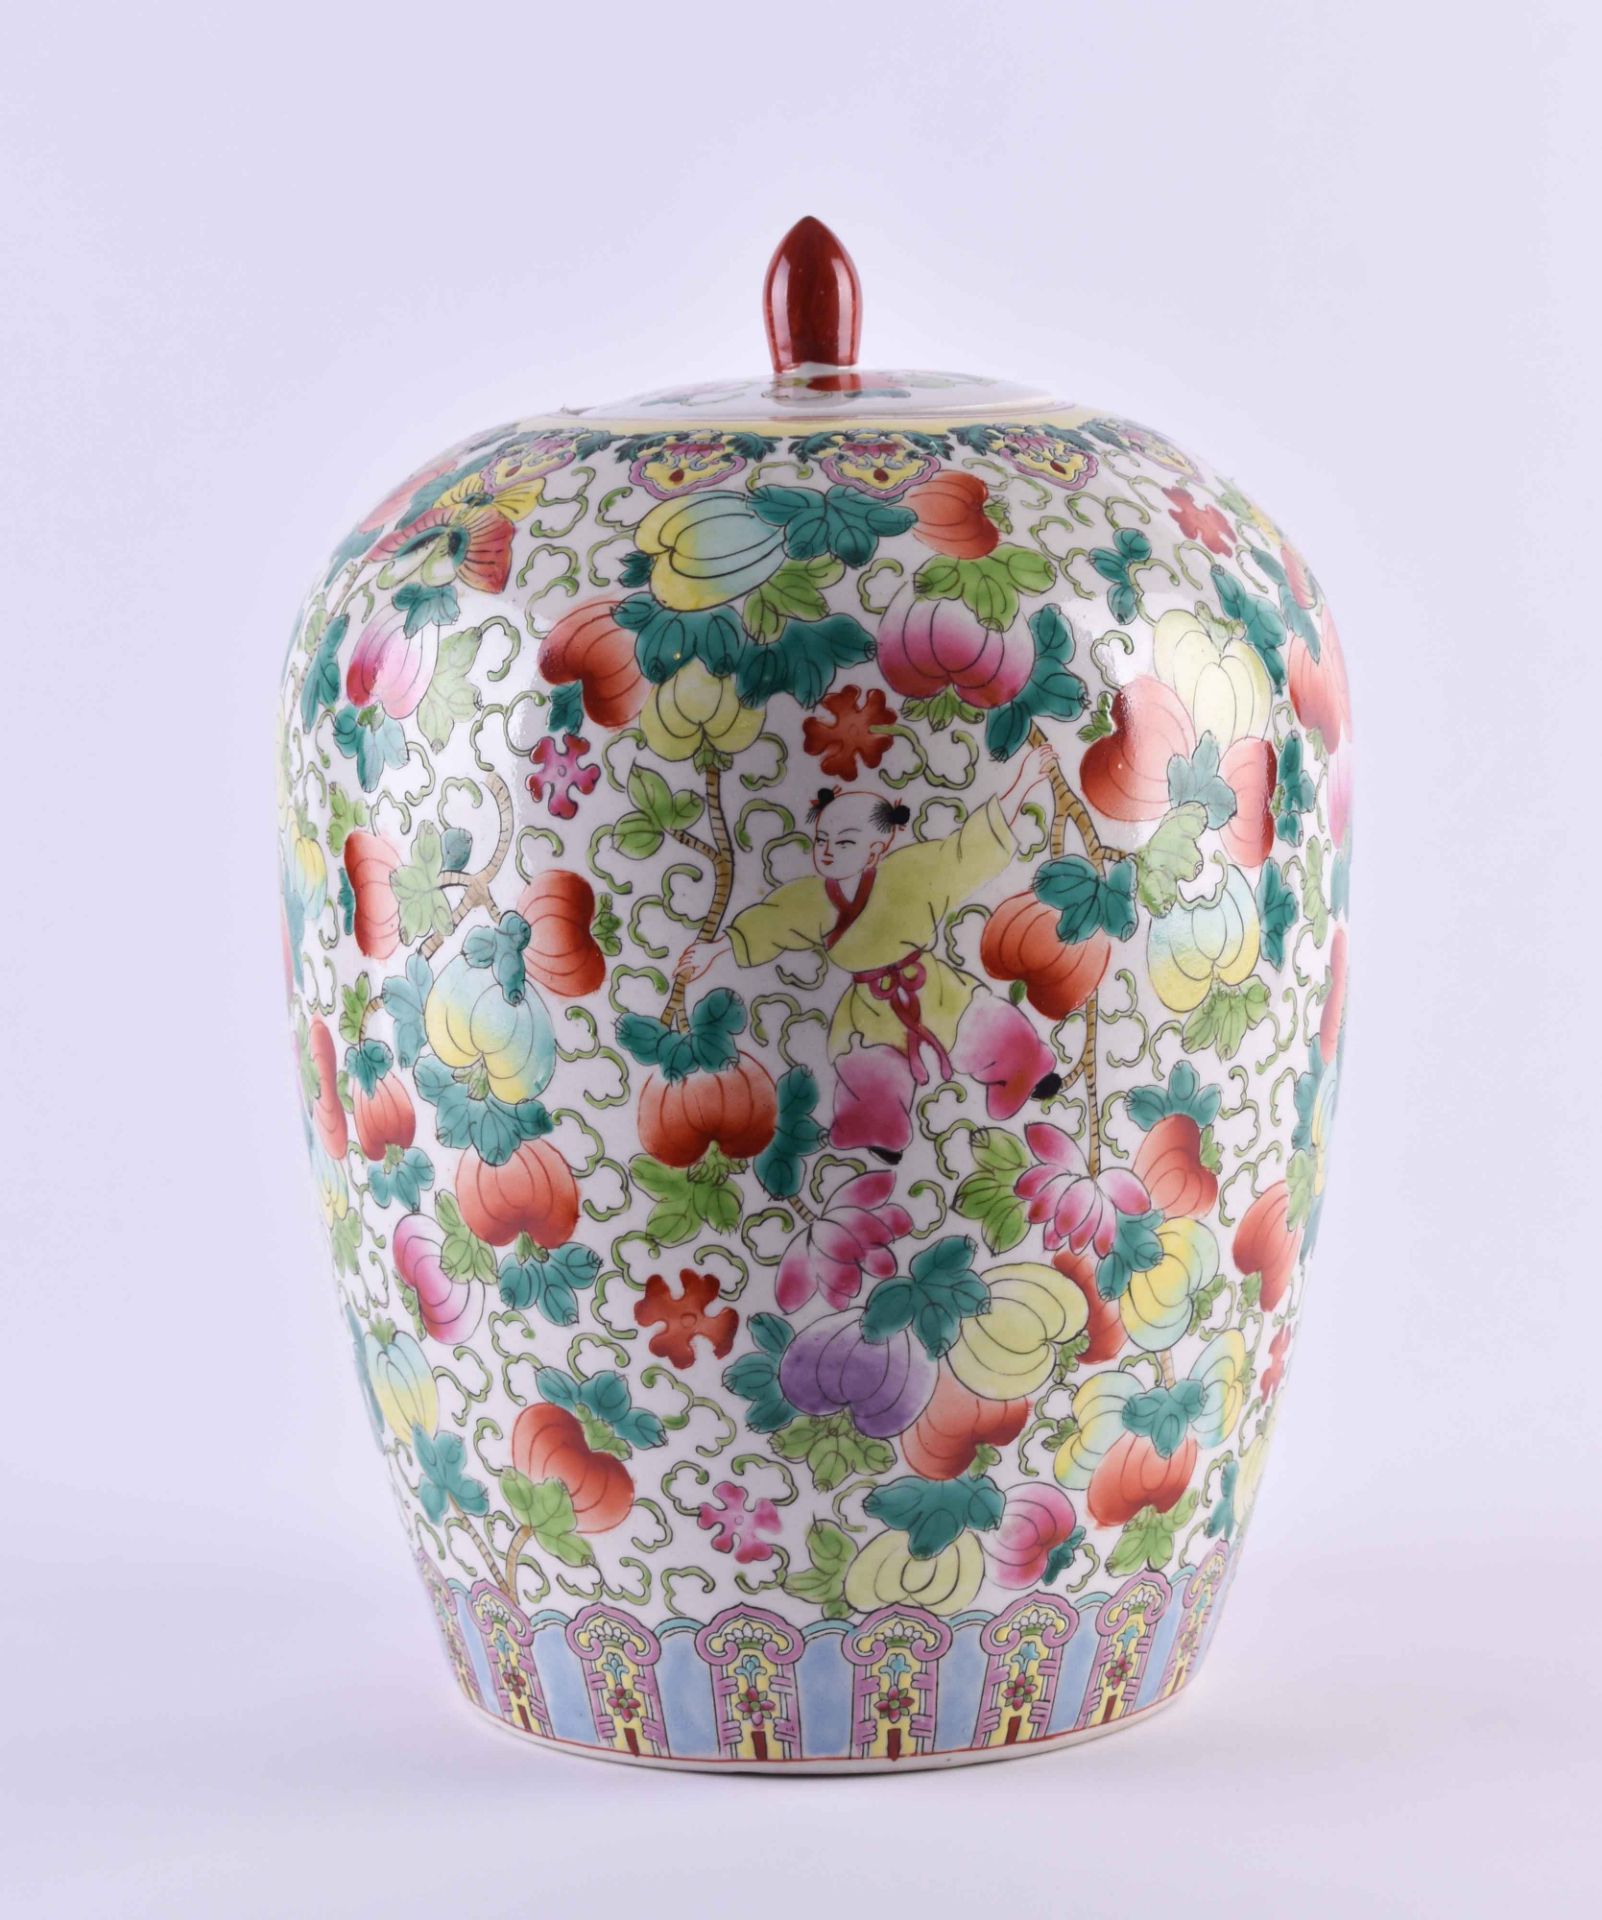 Lidded vessel China 19th /20th century - Image 2 of 6